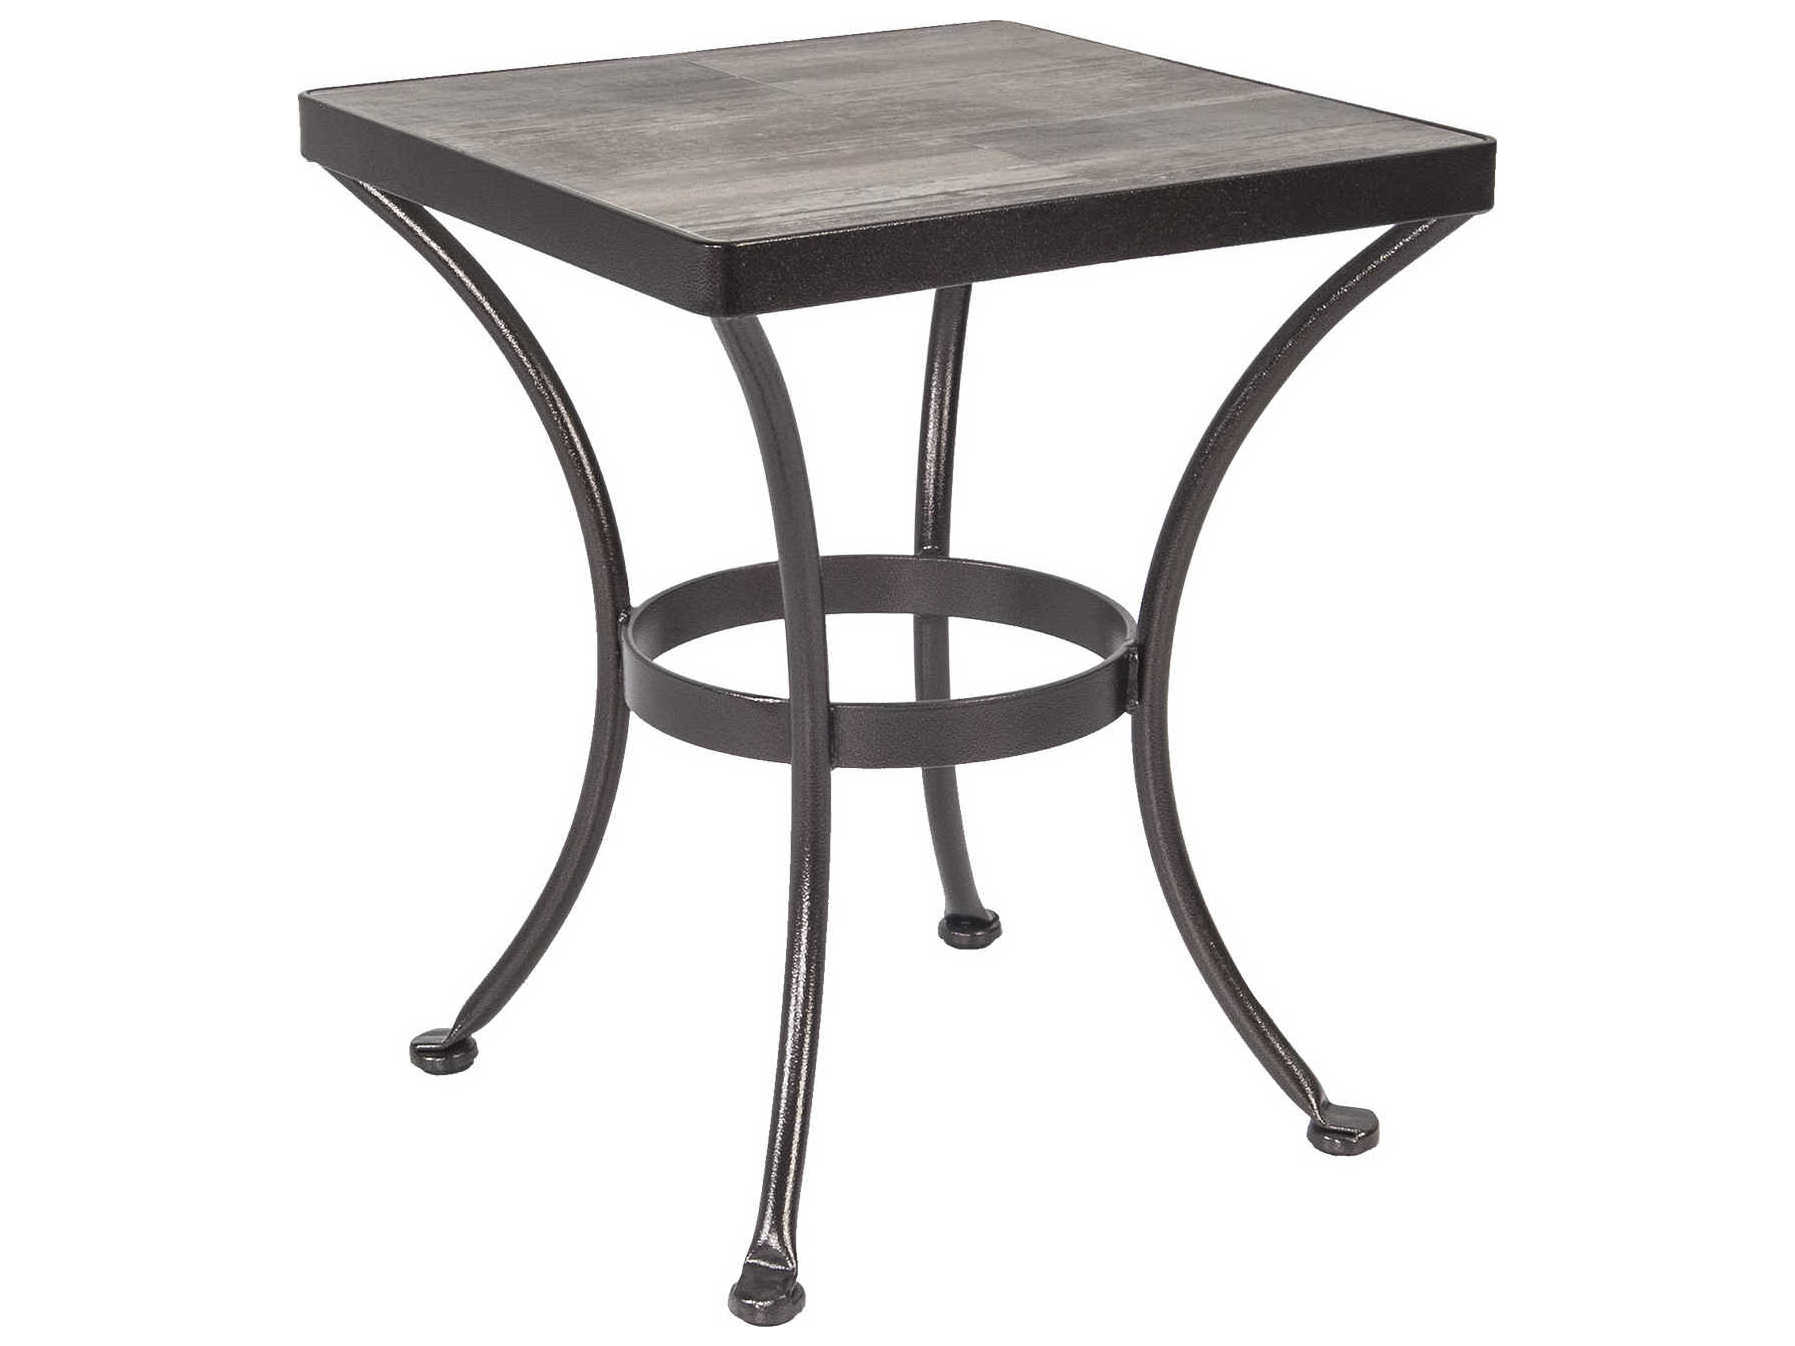 OW Lee Accent Wrought Iron 20 Square Side Table | OW51LT20SQ